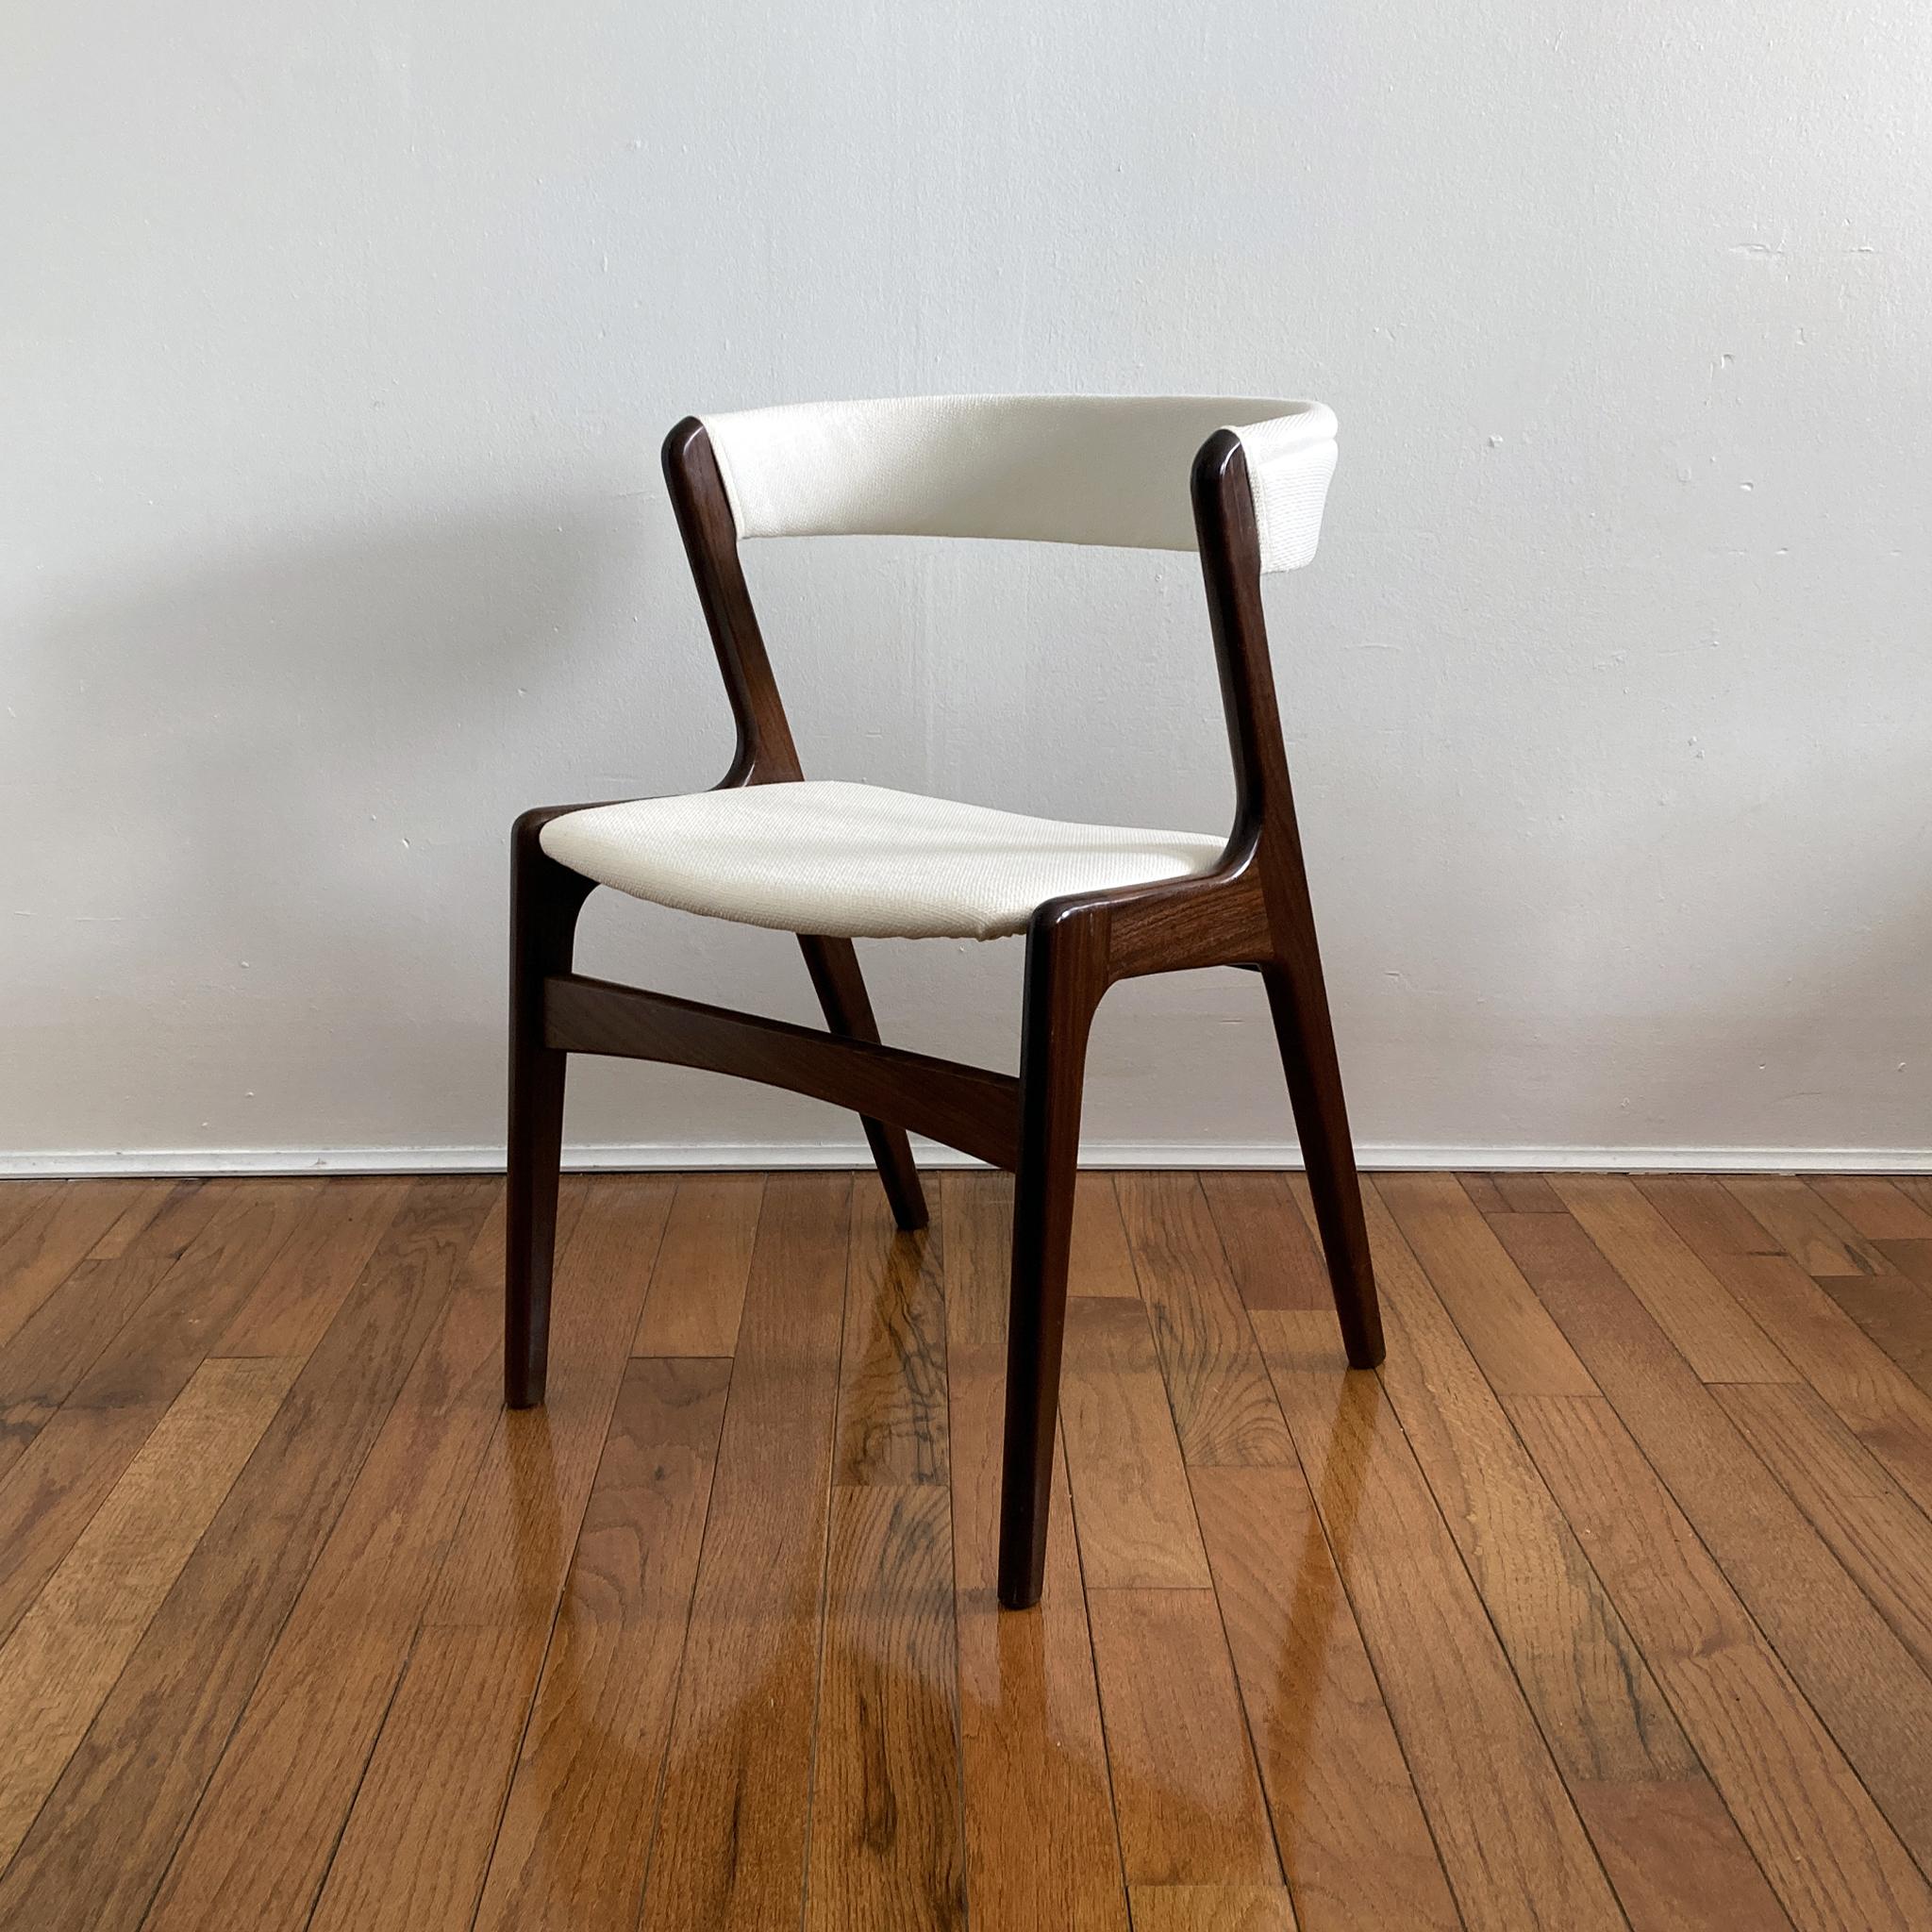 Kai Kristiansen Ivory Tweed Curved Back Teak Chairs, Danish, 1960s, Pair of Two For Sale 3